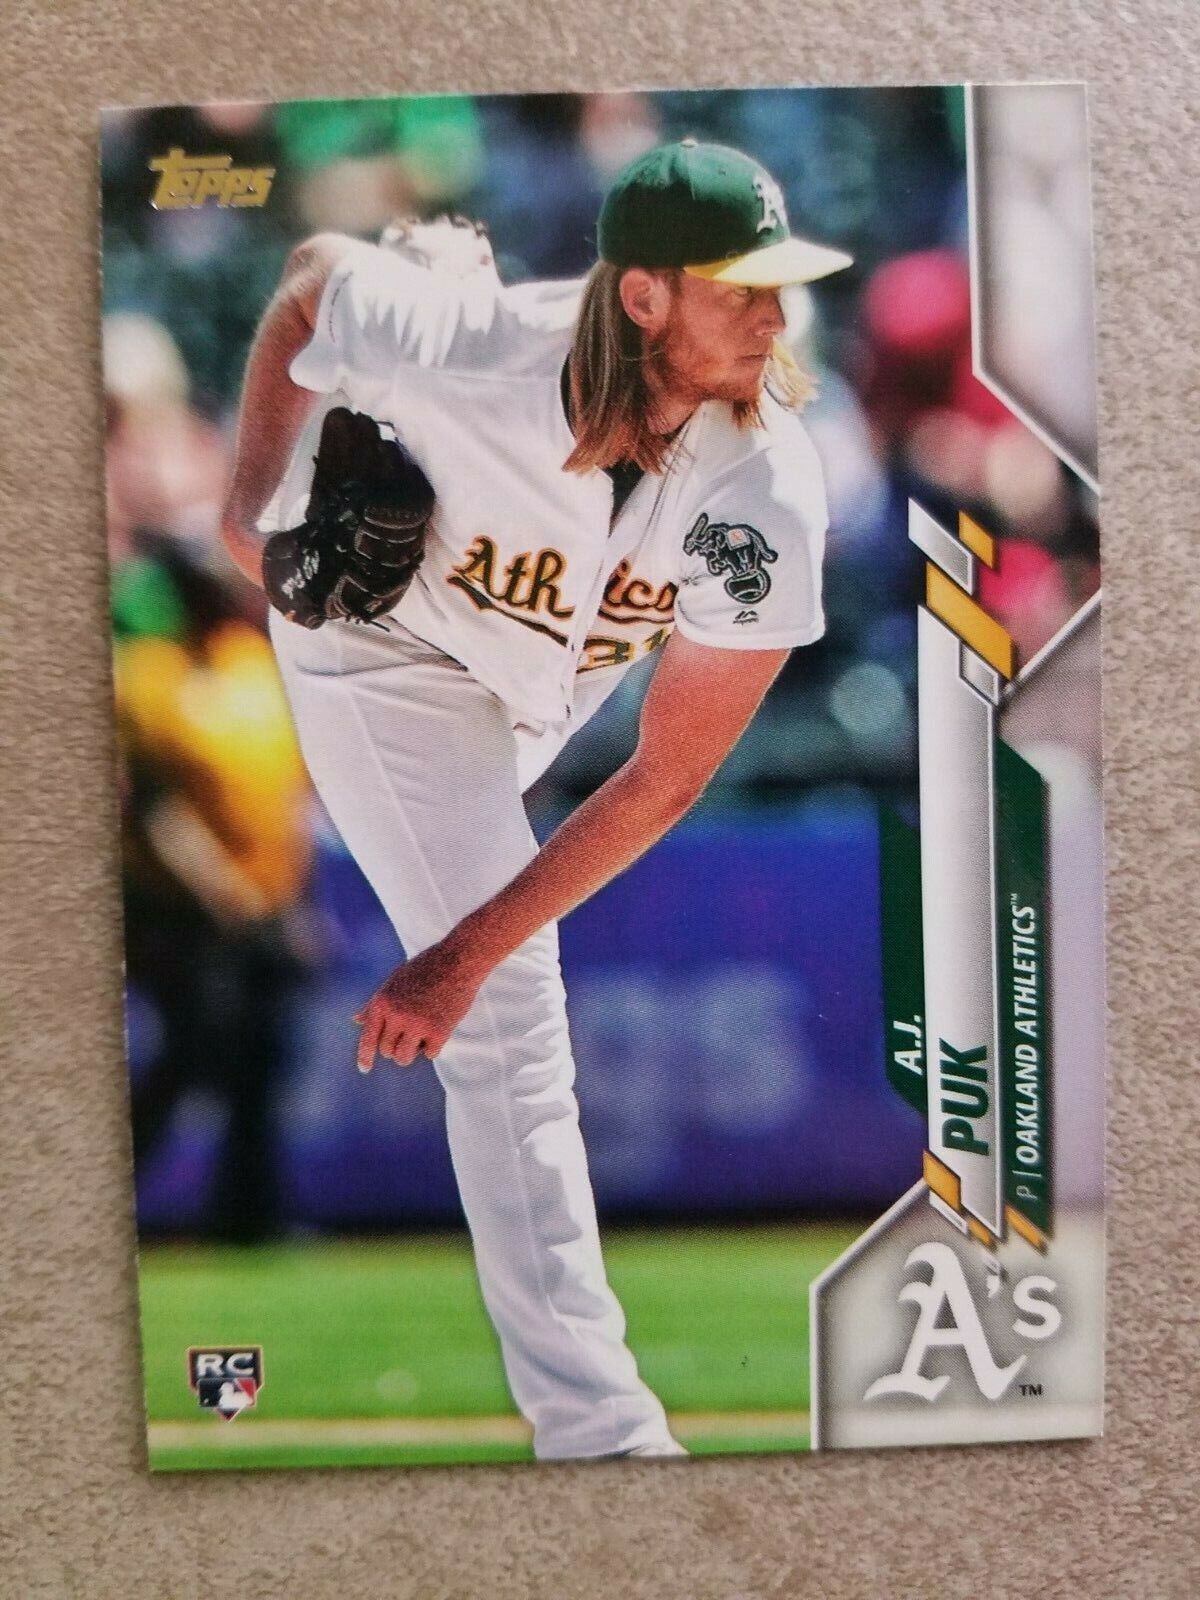 2020 Topps #251 A.J. Puk RC Rookie Card